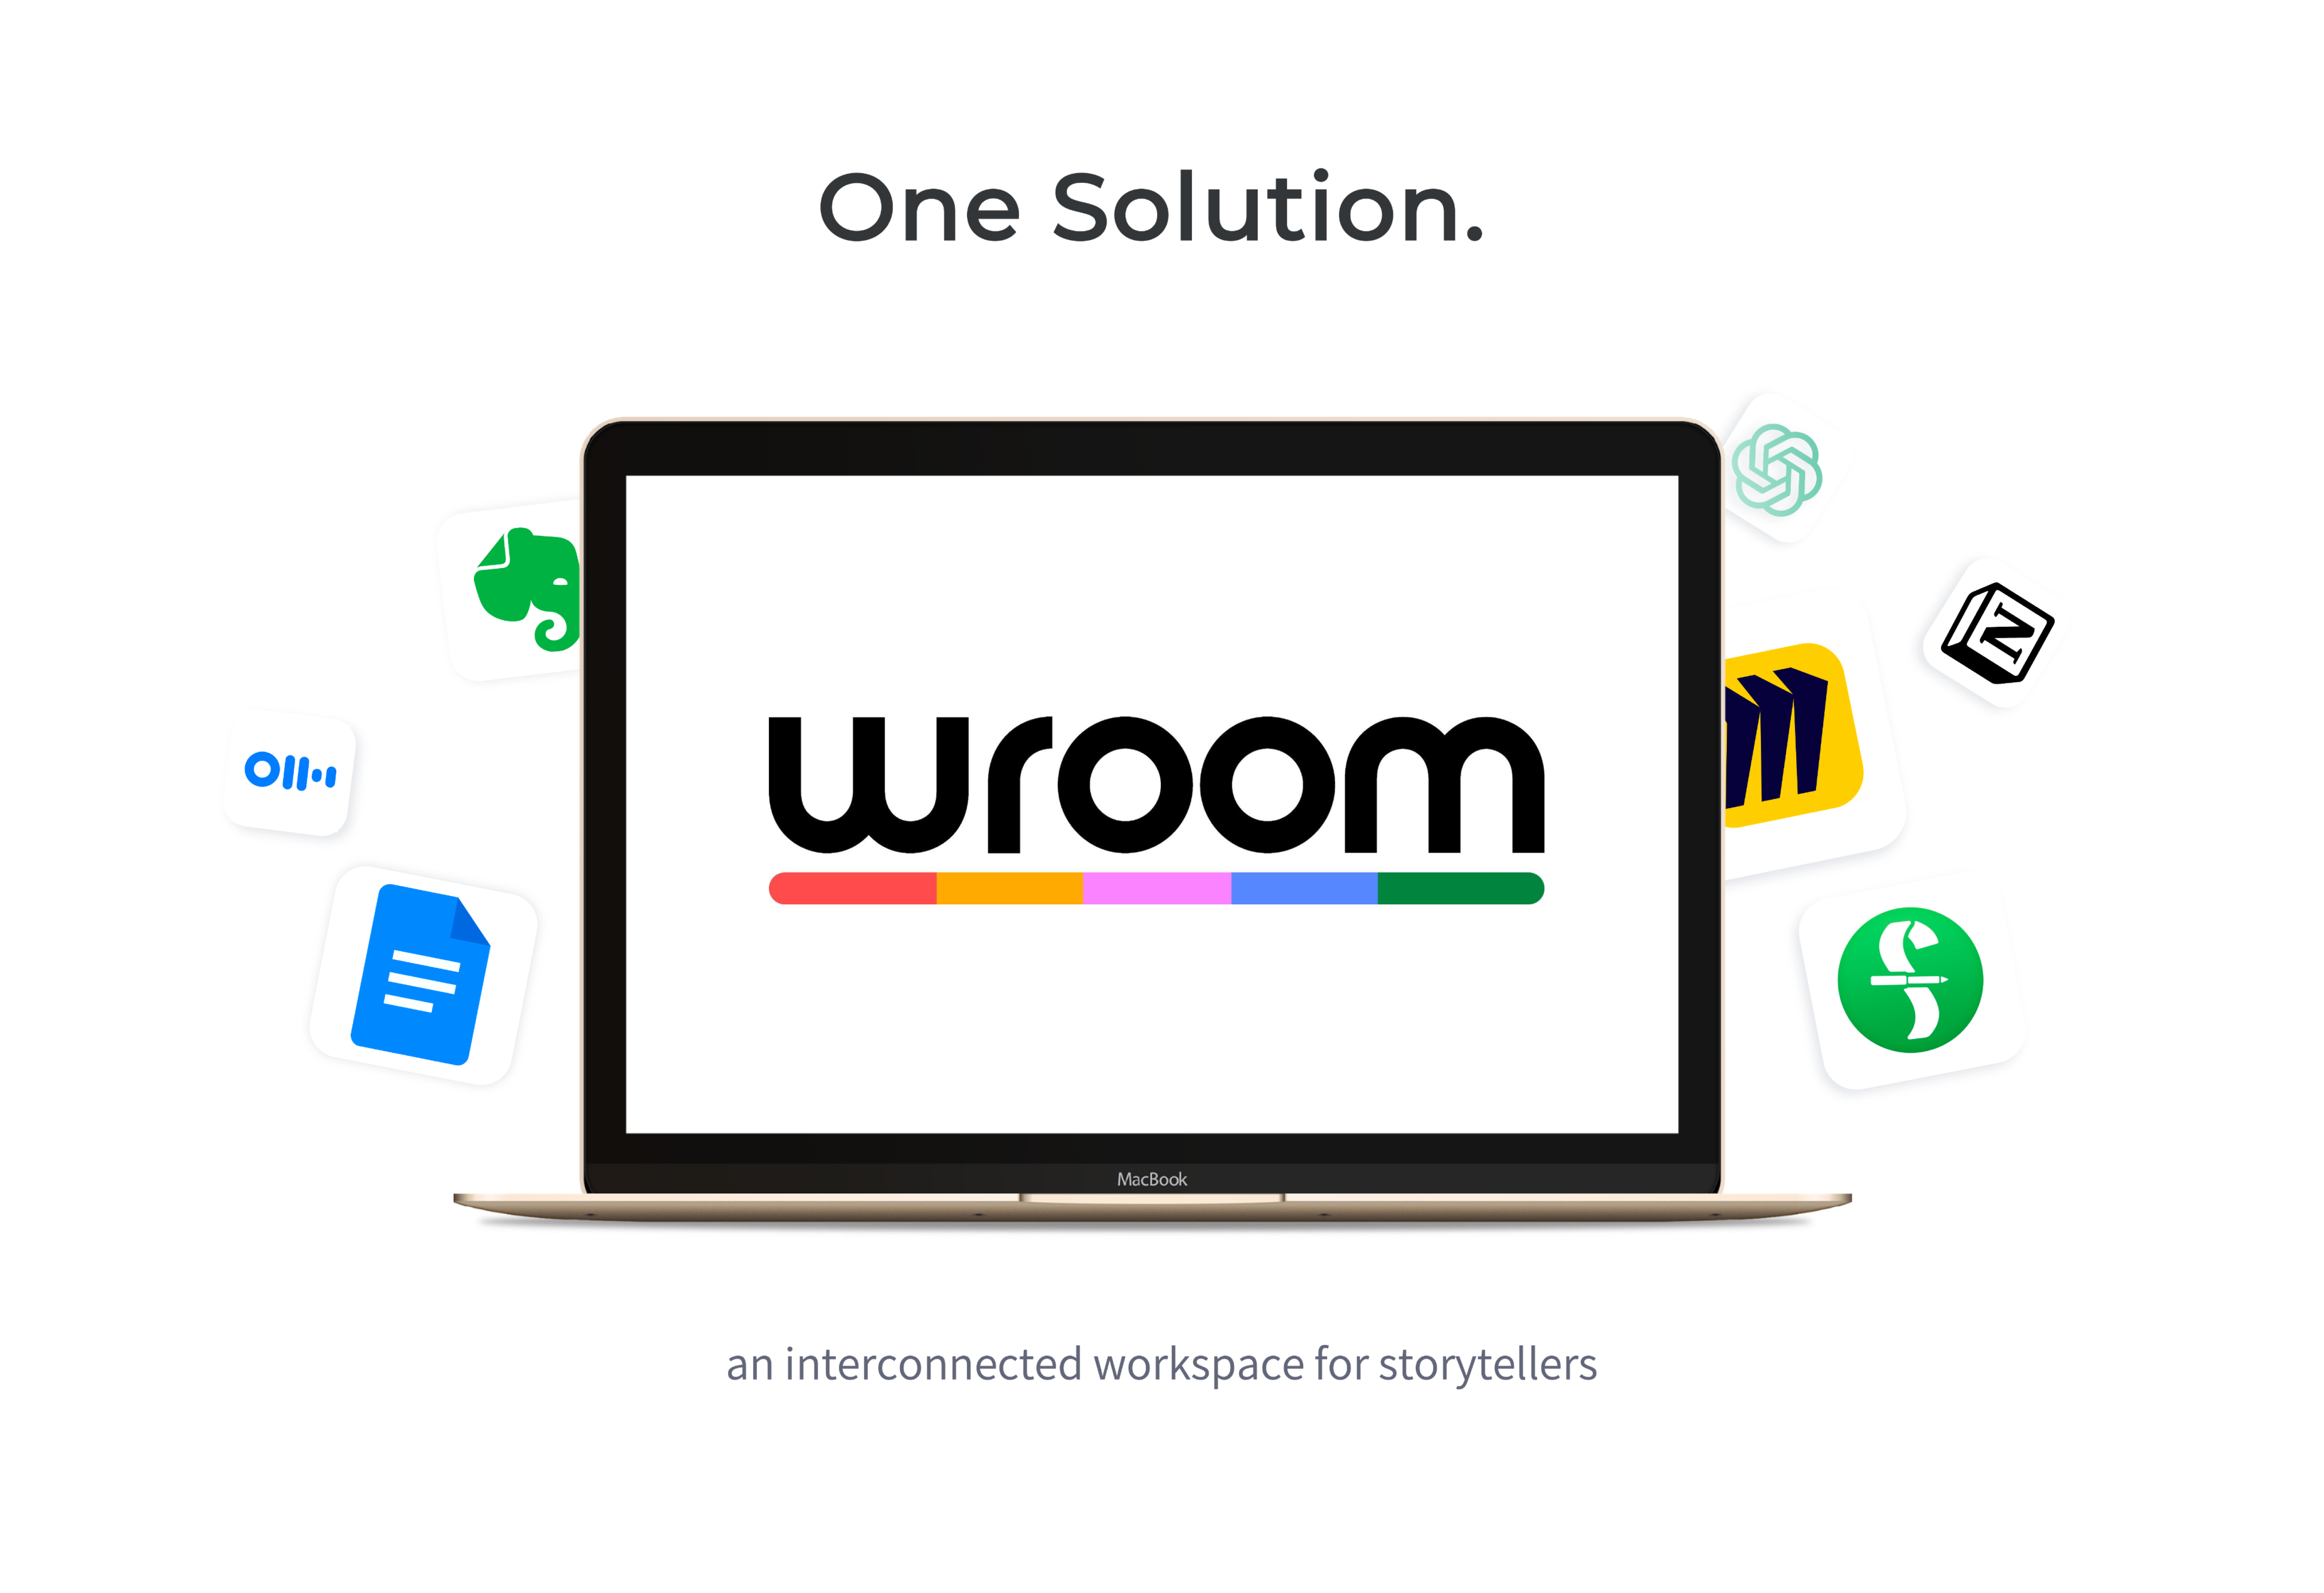 Introducing 'Wroom': The Ultimate Interconnected Workspace for Storytellers. The image prominently displays a sleek MacBook with the 'Wroom' wordmark logo on its screen, underscored by a vibrant, multi-colored underline symbolizing diversity and creativity. Above the screen, the caption 'One Solution.' suggests a comprehensive toolset for creative work. Below, 'an interconnected workspace for storytellers' describes the platform's purpose. Surrounding the laptop are floating icons, hinting at the integration of various productivity applications like note-taking, document management, and project planning, all essential for a seamless storytelling experience. This graphic is perfect for creative professionals seeking a singular digital space for all their narrative projects.